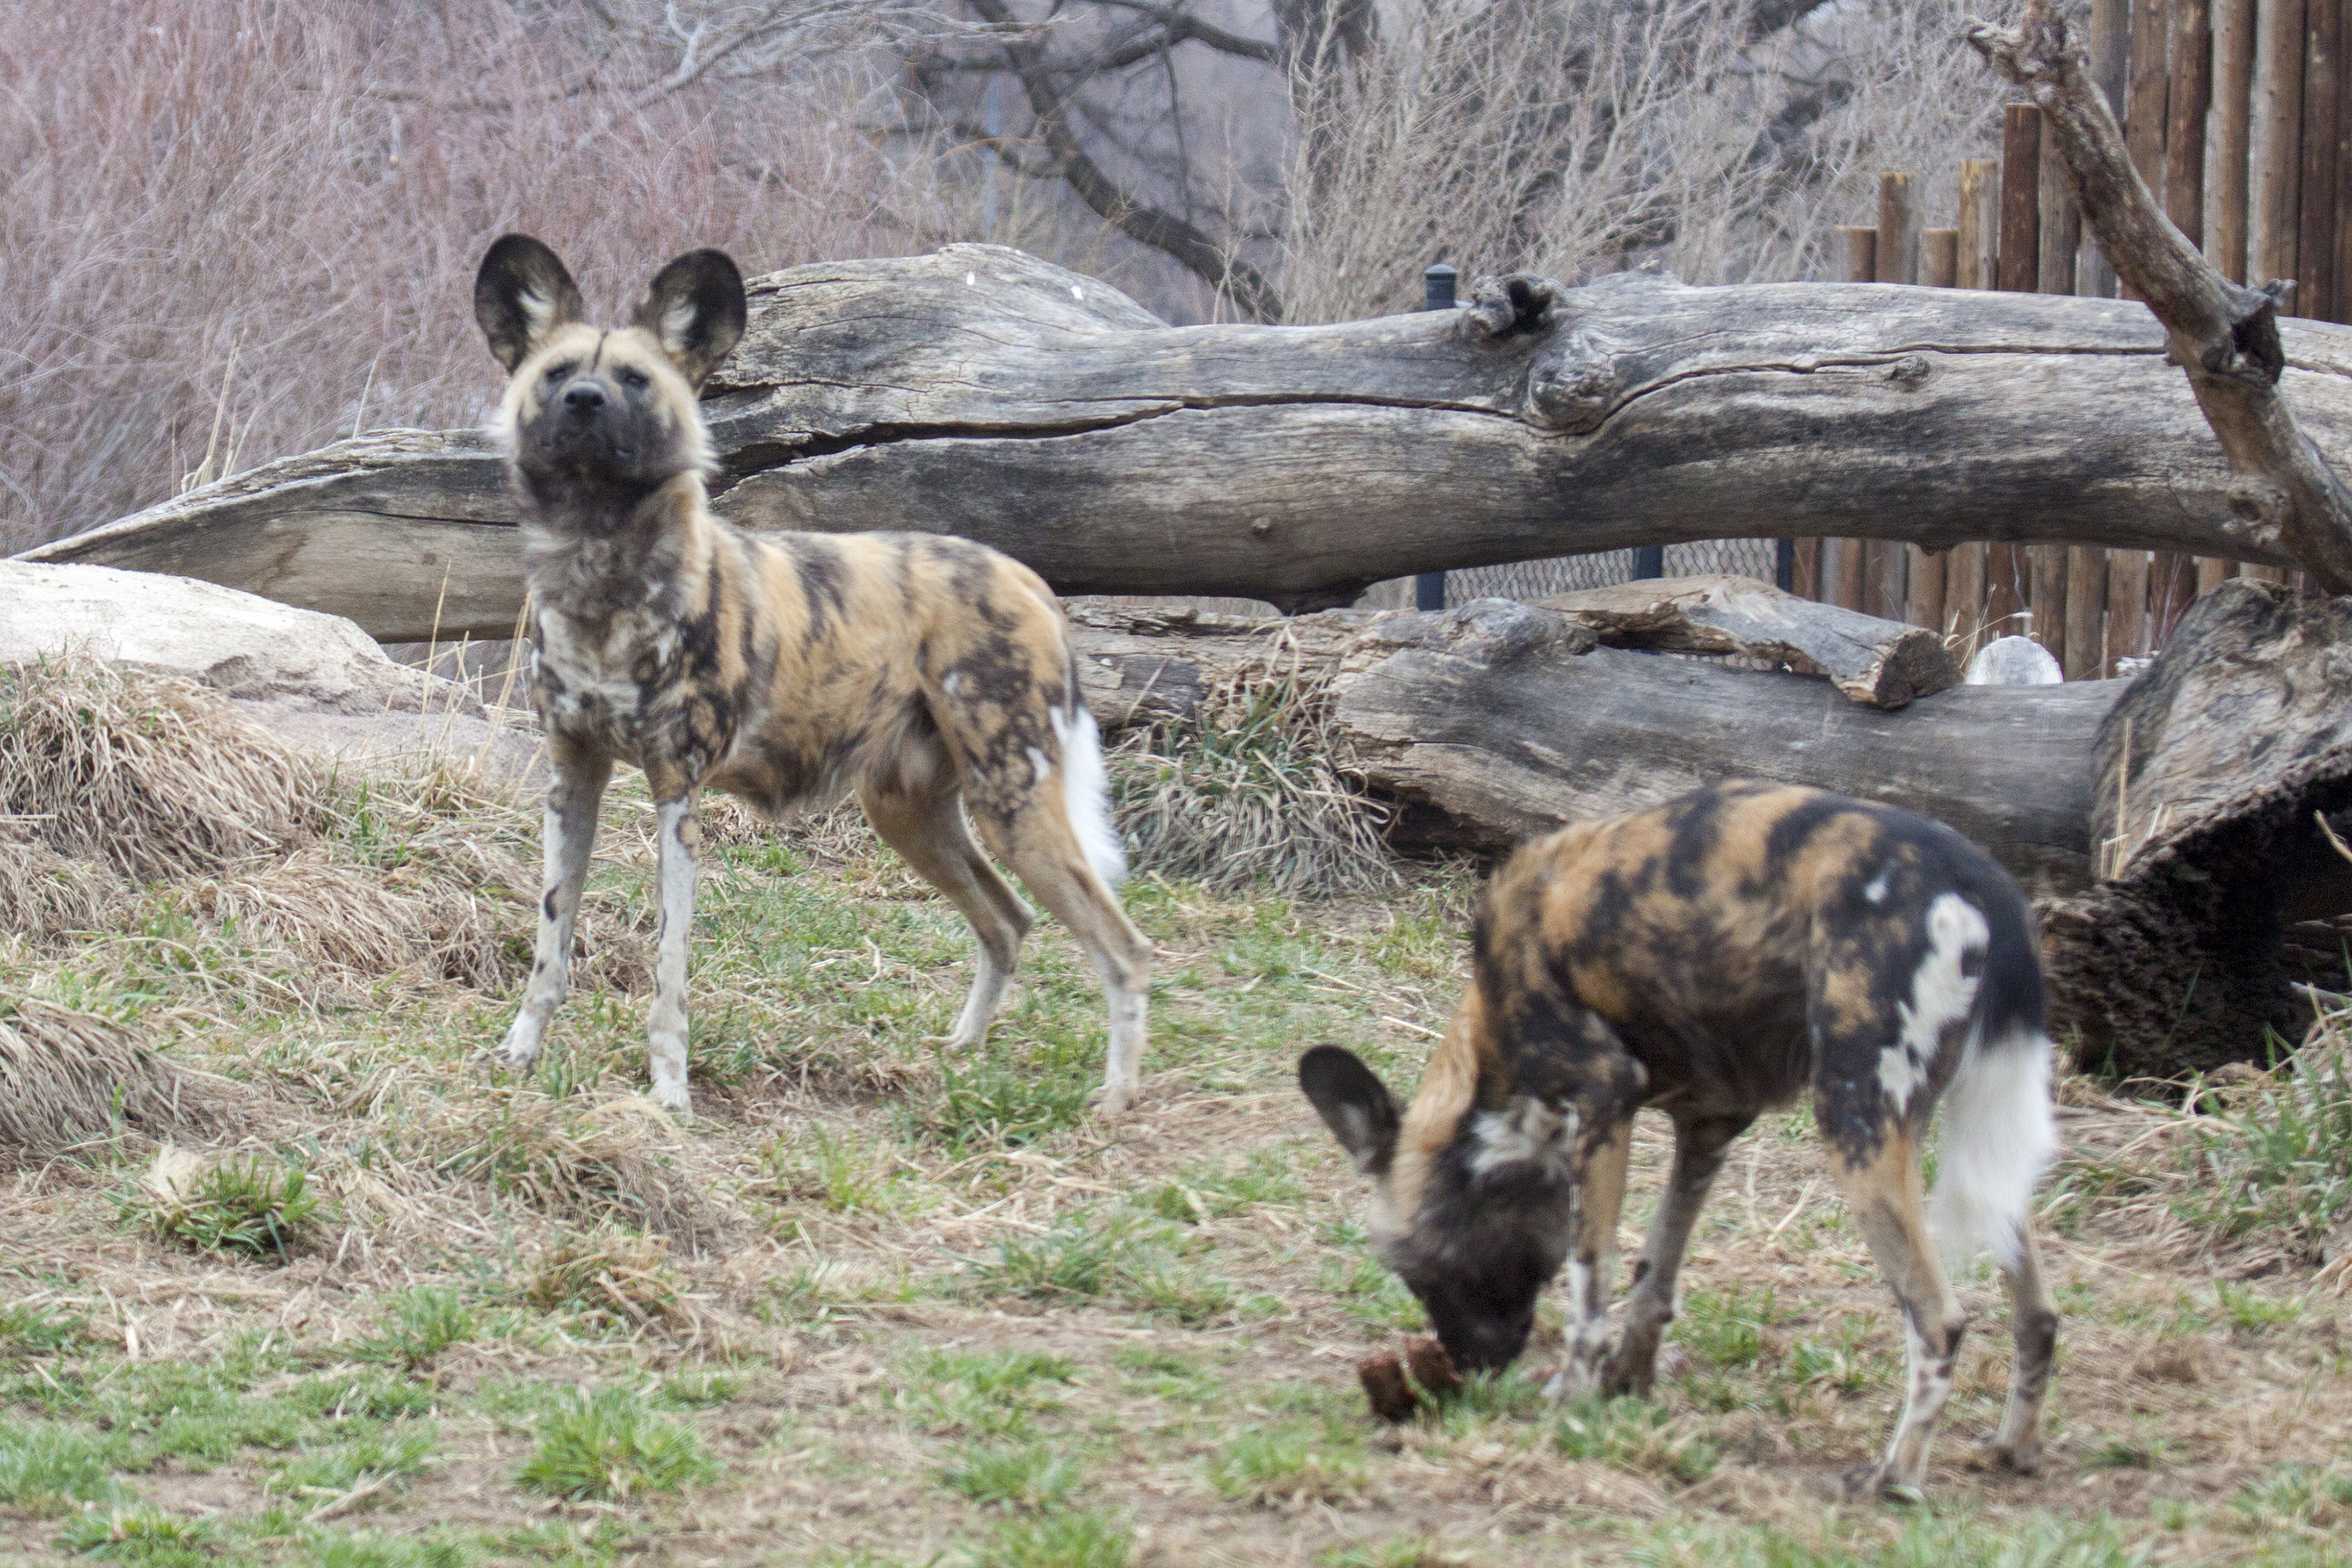 Jesse and Taco, two new African wild dogs at the Denver Zoo (credit: Denver Zoo)